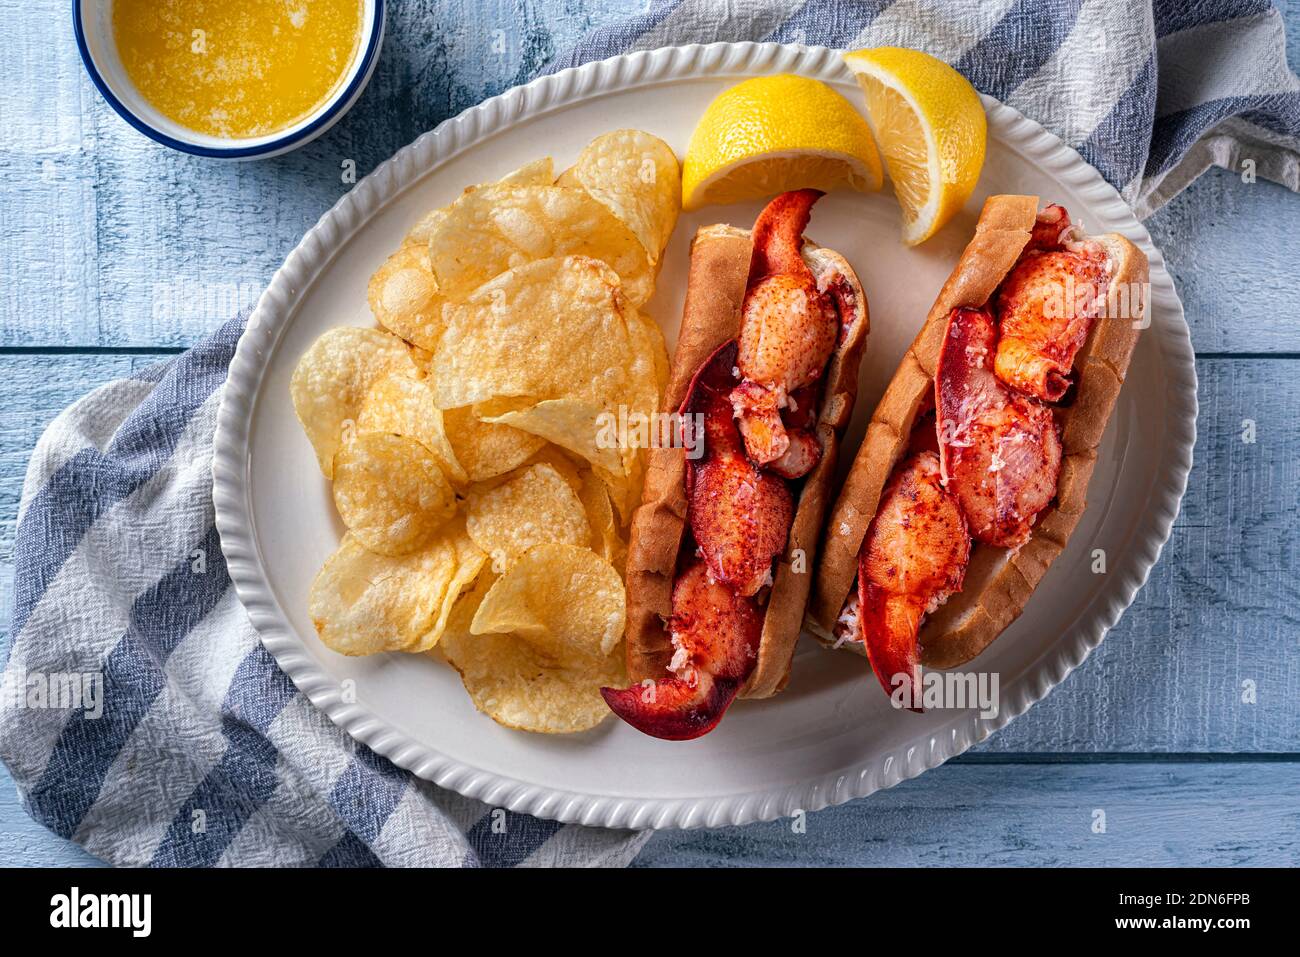 Delicious New England style lobster rolls with potato chips and melted butter on a wood table top, Stock Photo